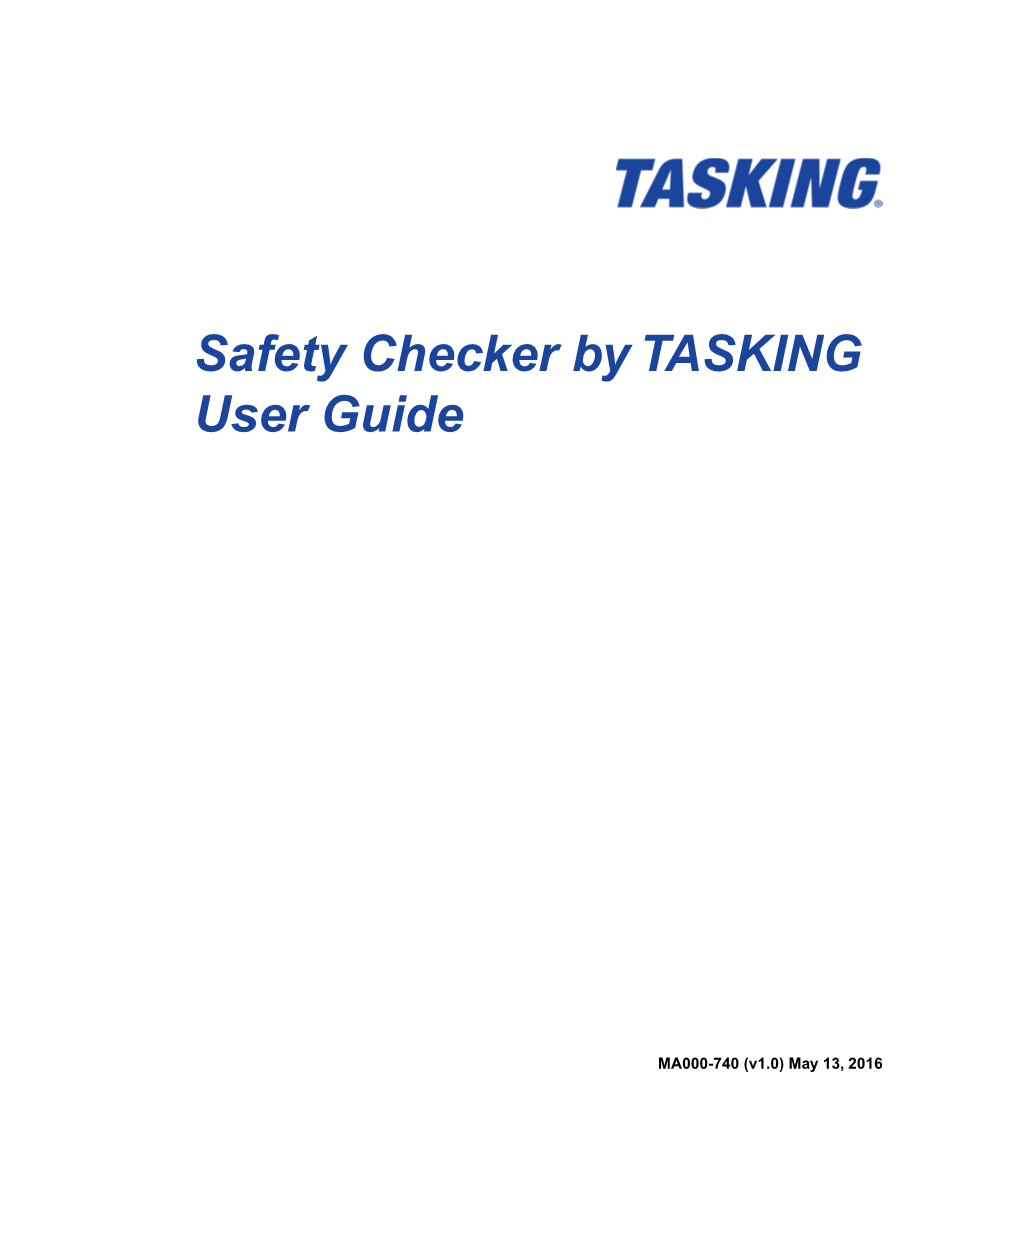 Safety Checker by TASKING User Guide